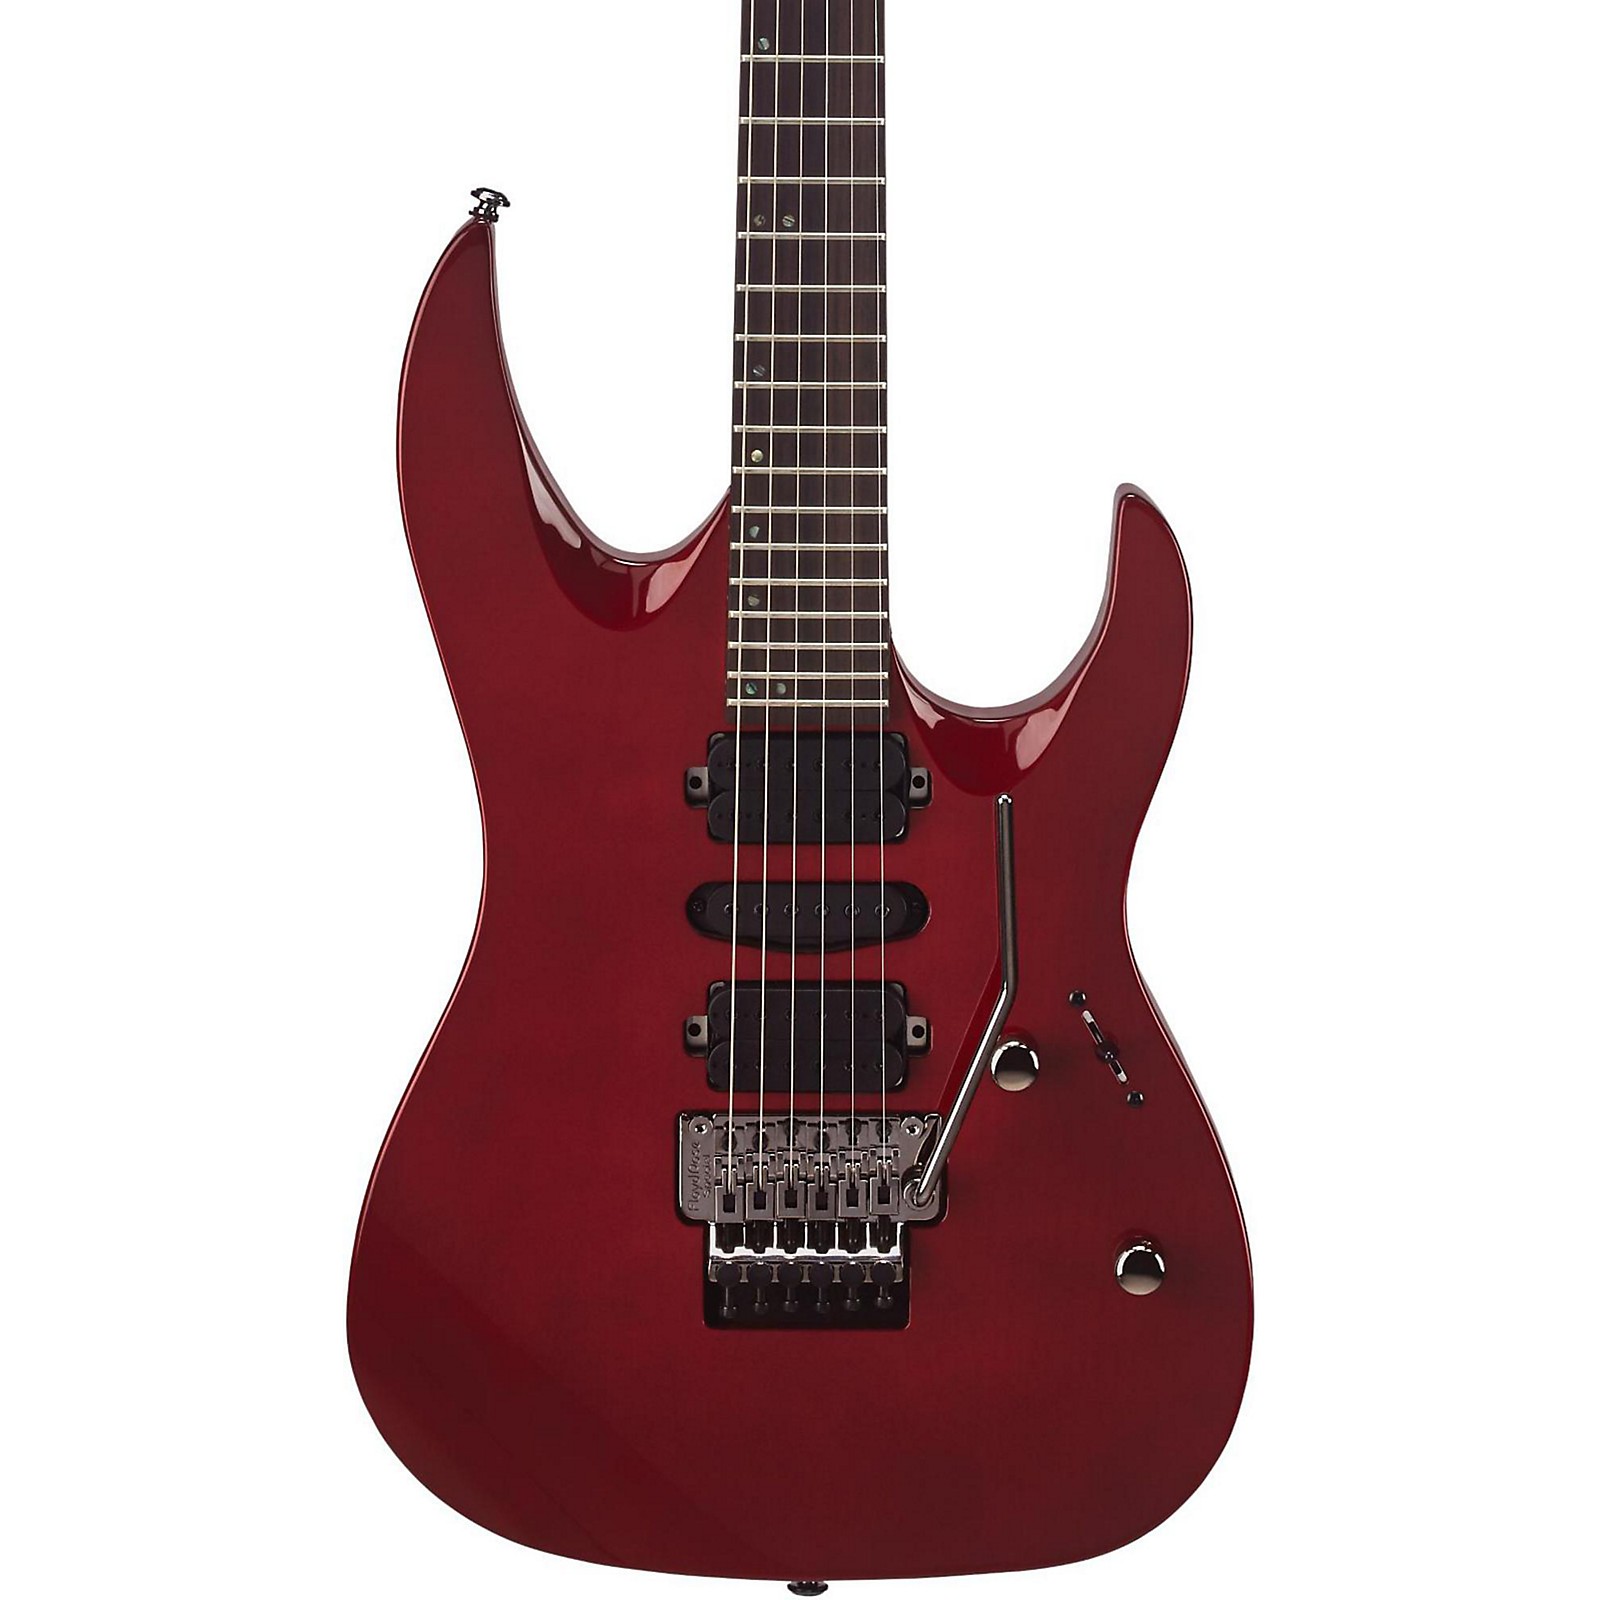 Mitchell Hd400 Hard Rock Double Cutaway Electric Guitar Transparent Red